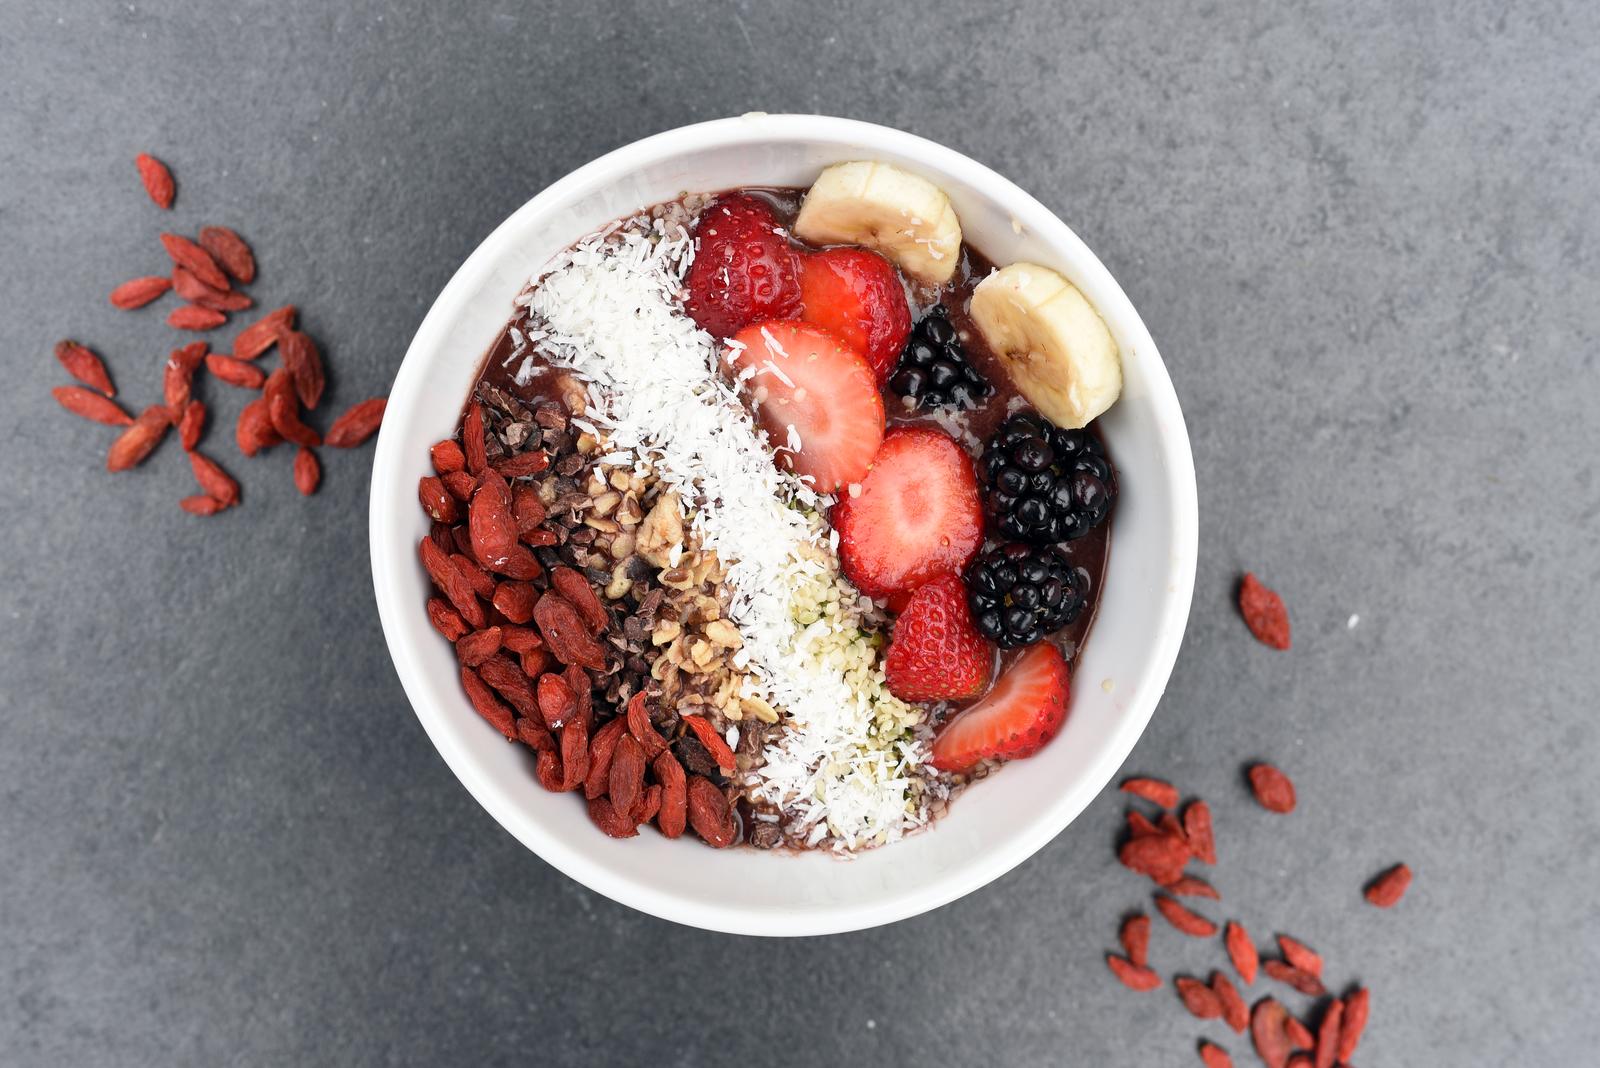 You got: Acai Bowl! What Should I Eat for Breakfast? 🥞 Take This Quiz If You Don’t Know What to Eat